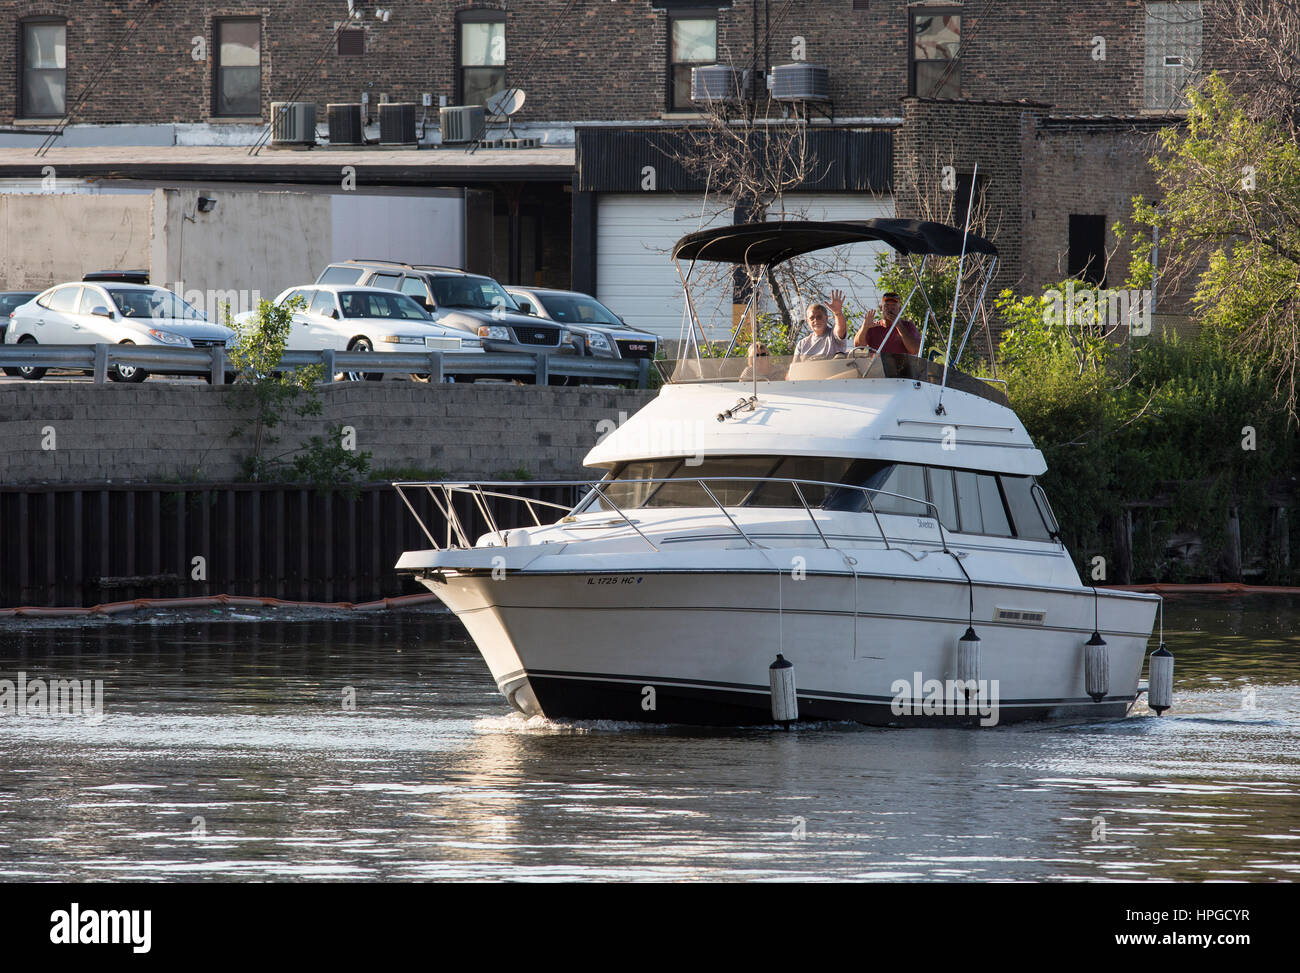 Recreational boat on the Chicago river, Chinatown district of Chicago. Stock Photo